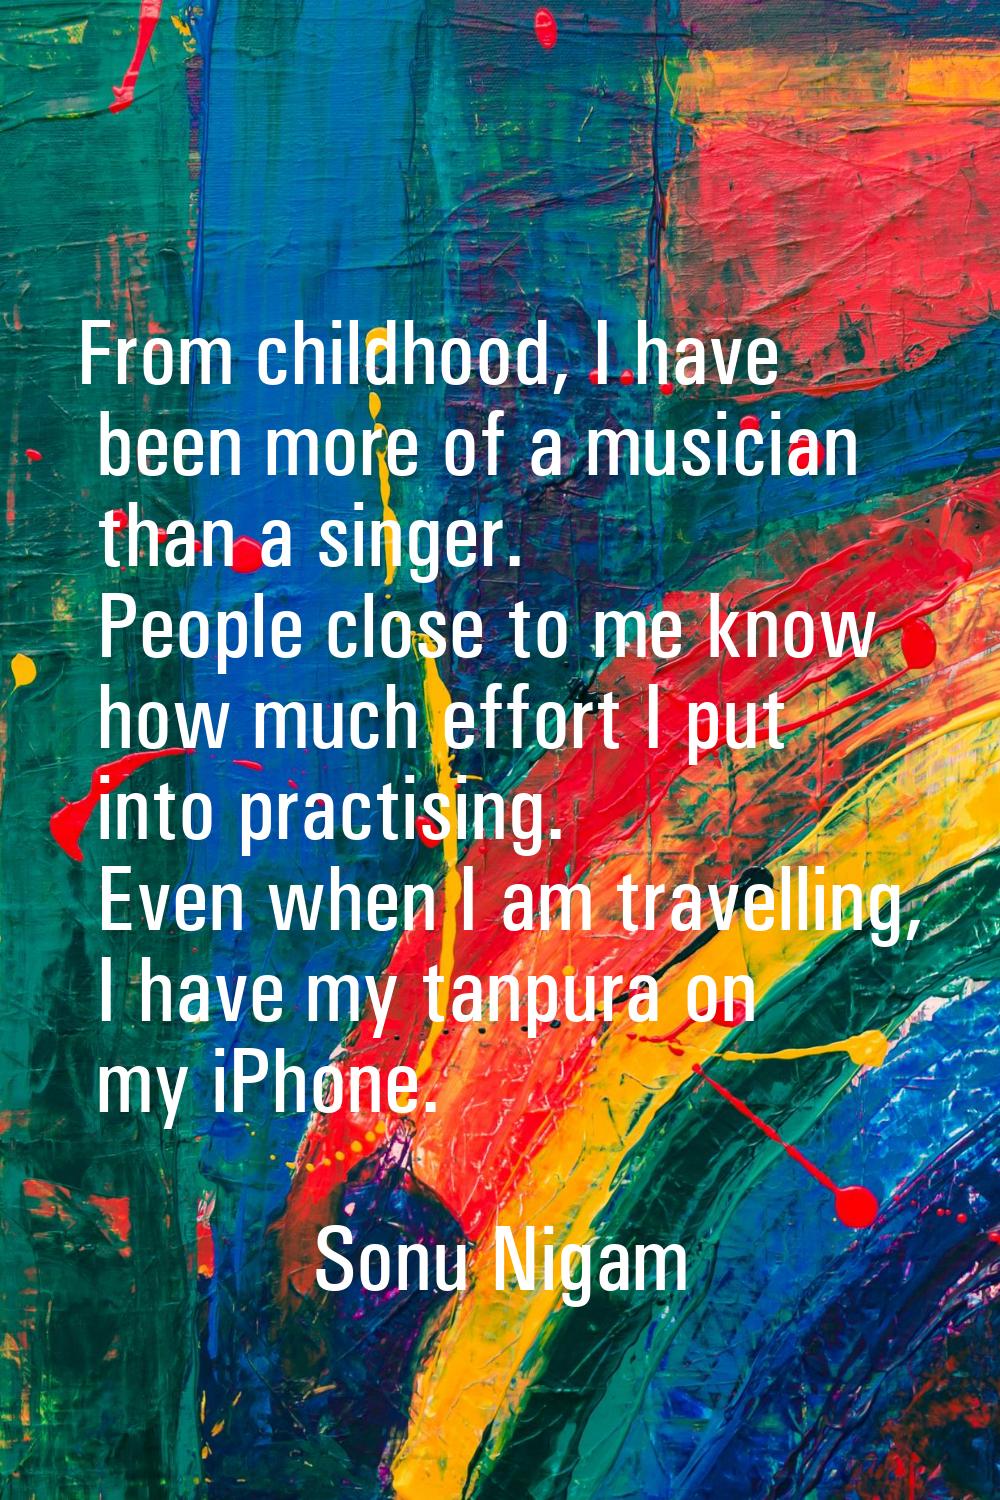 From childhood, I have been more of a musician than a singer. People close to me know how much effo